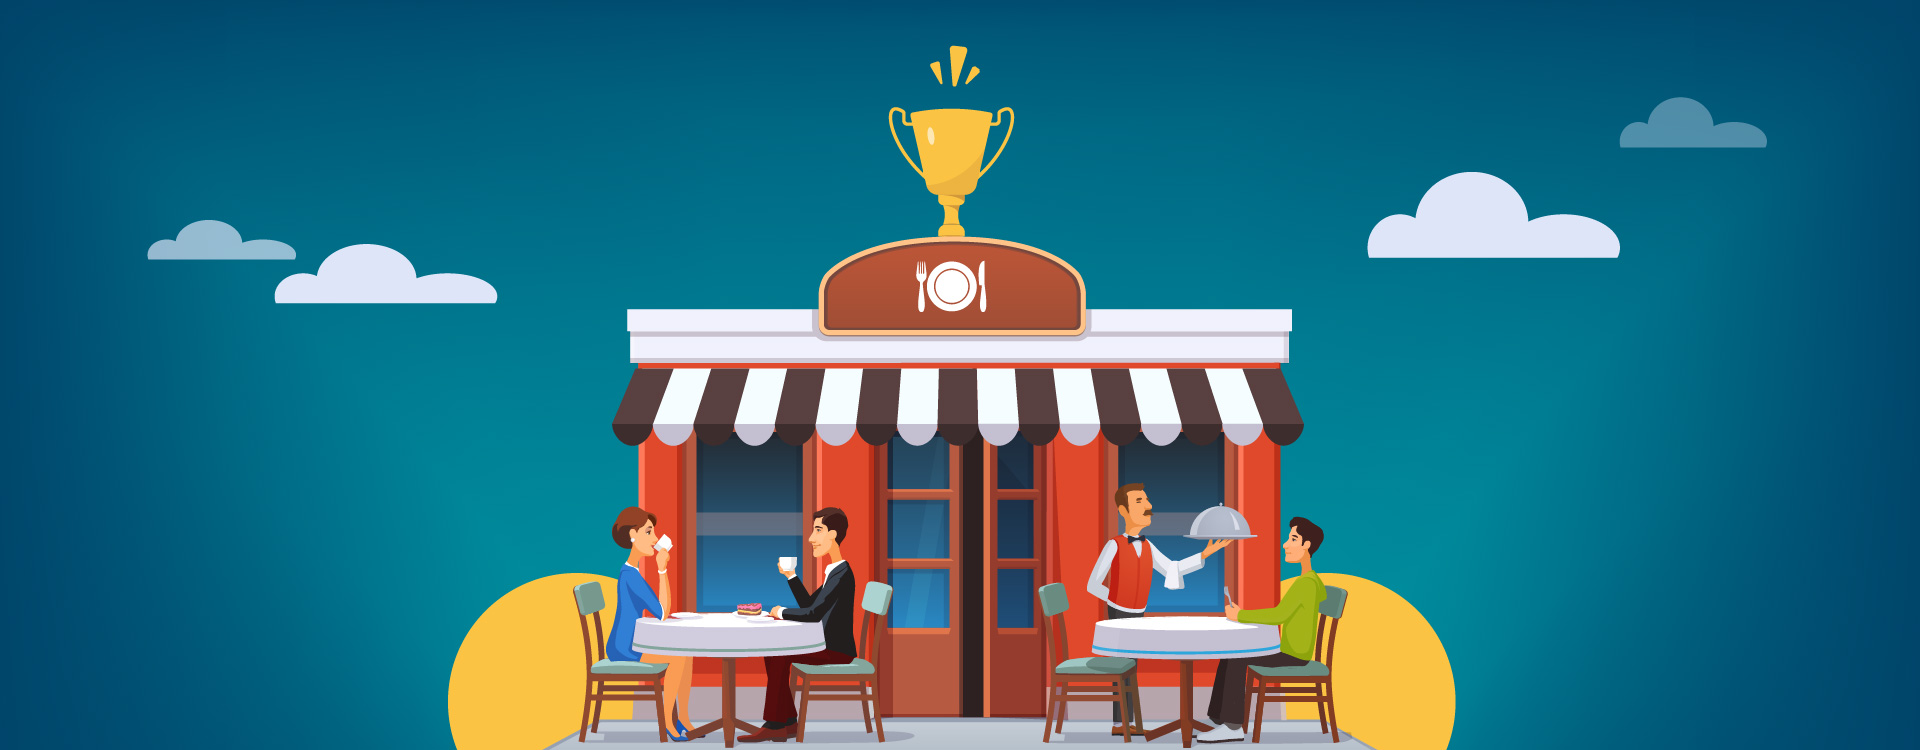 Standalone restaurants own a major share in the restaurant and food businesses.